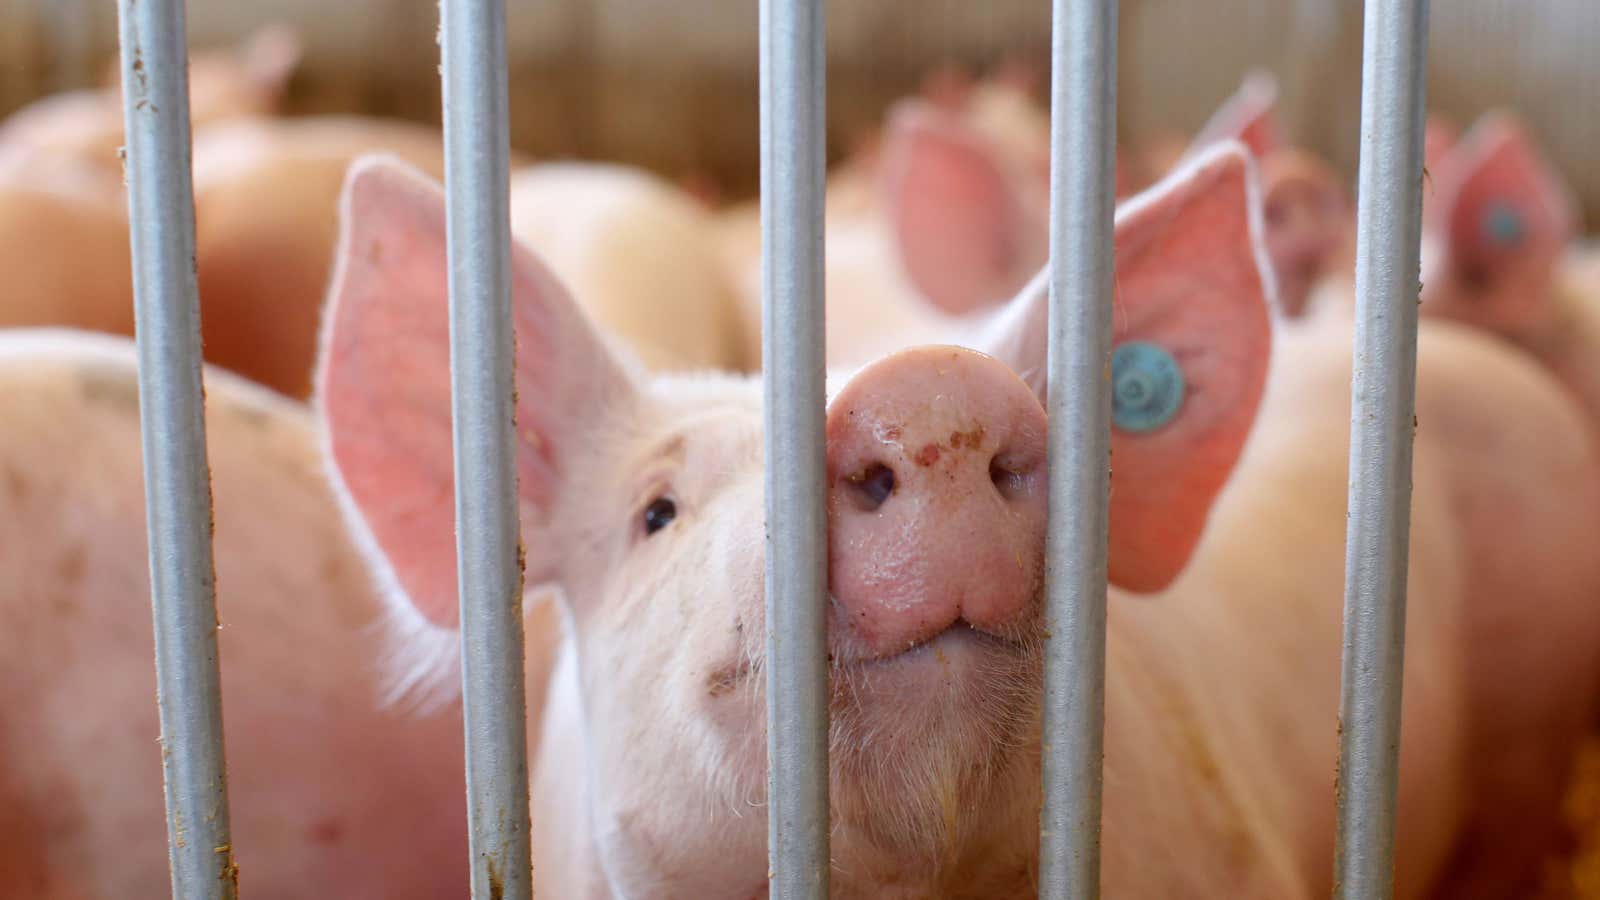 The work in pigs opens the door for life-saving clinical applications in the future.